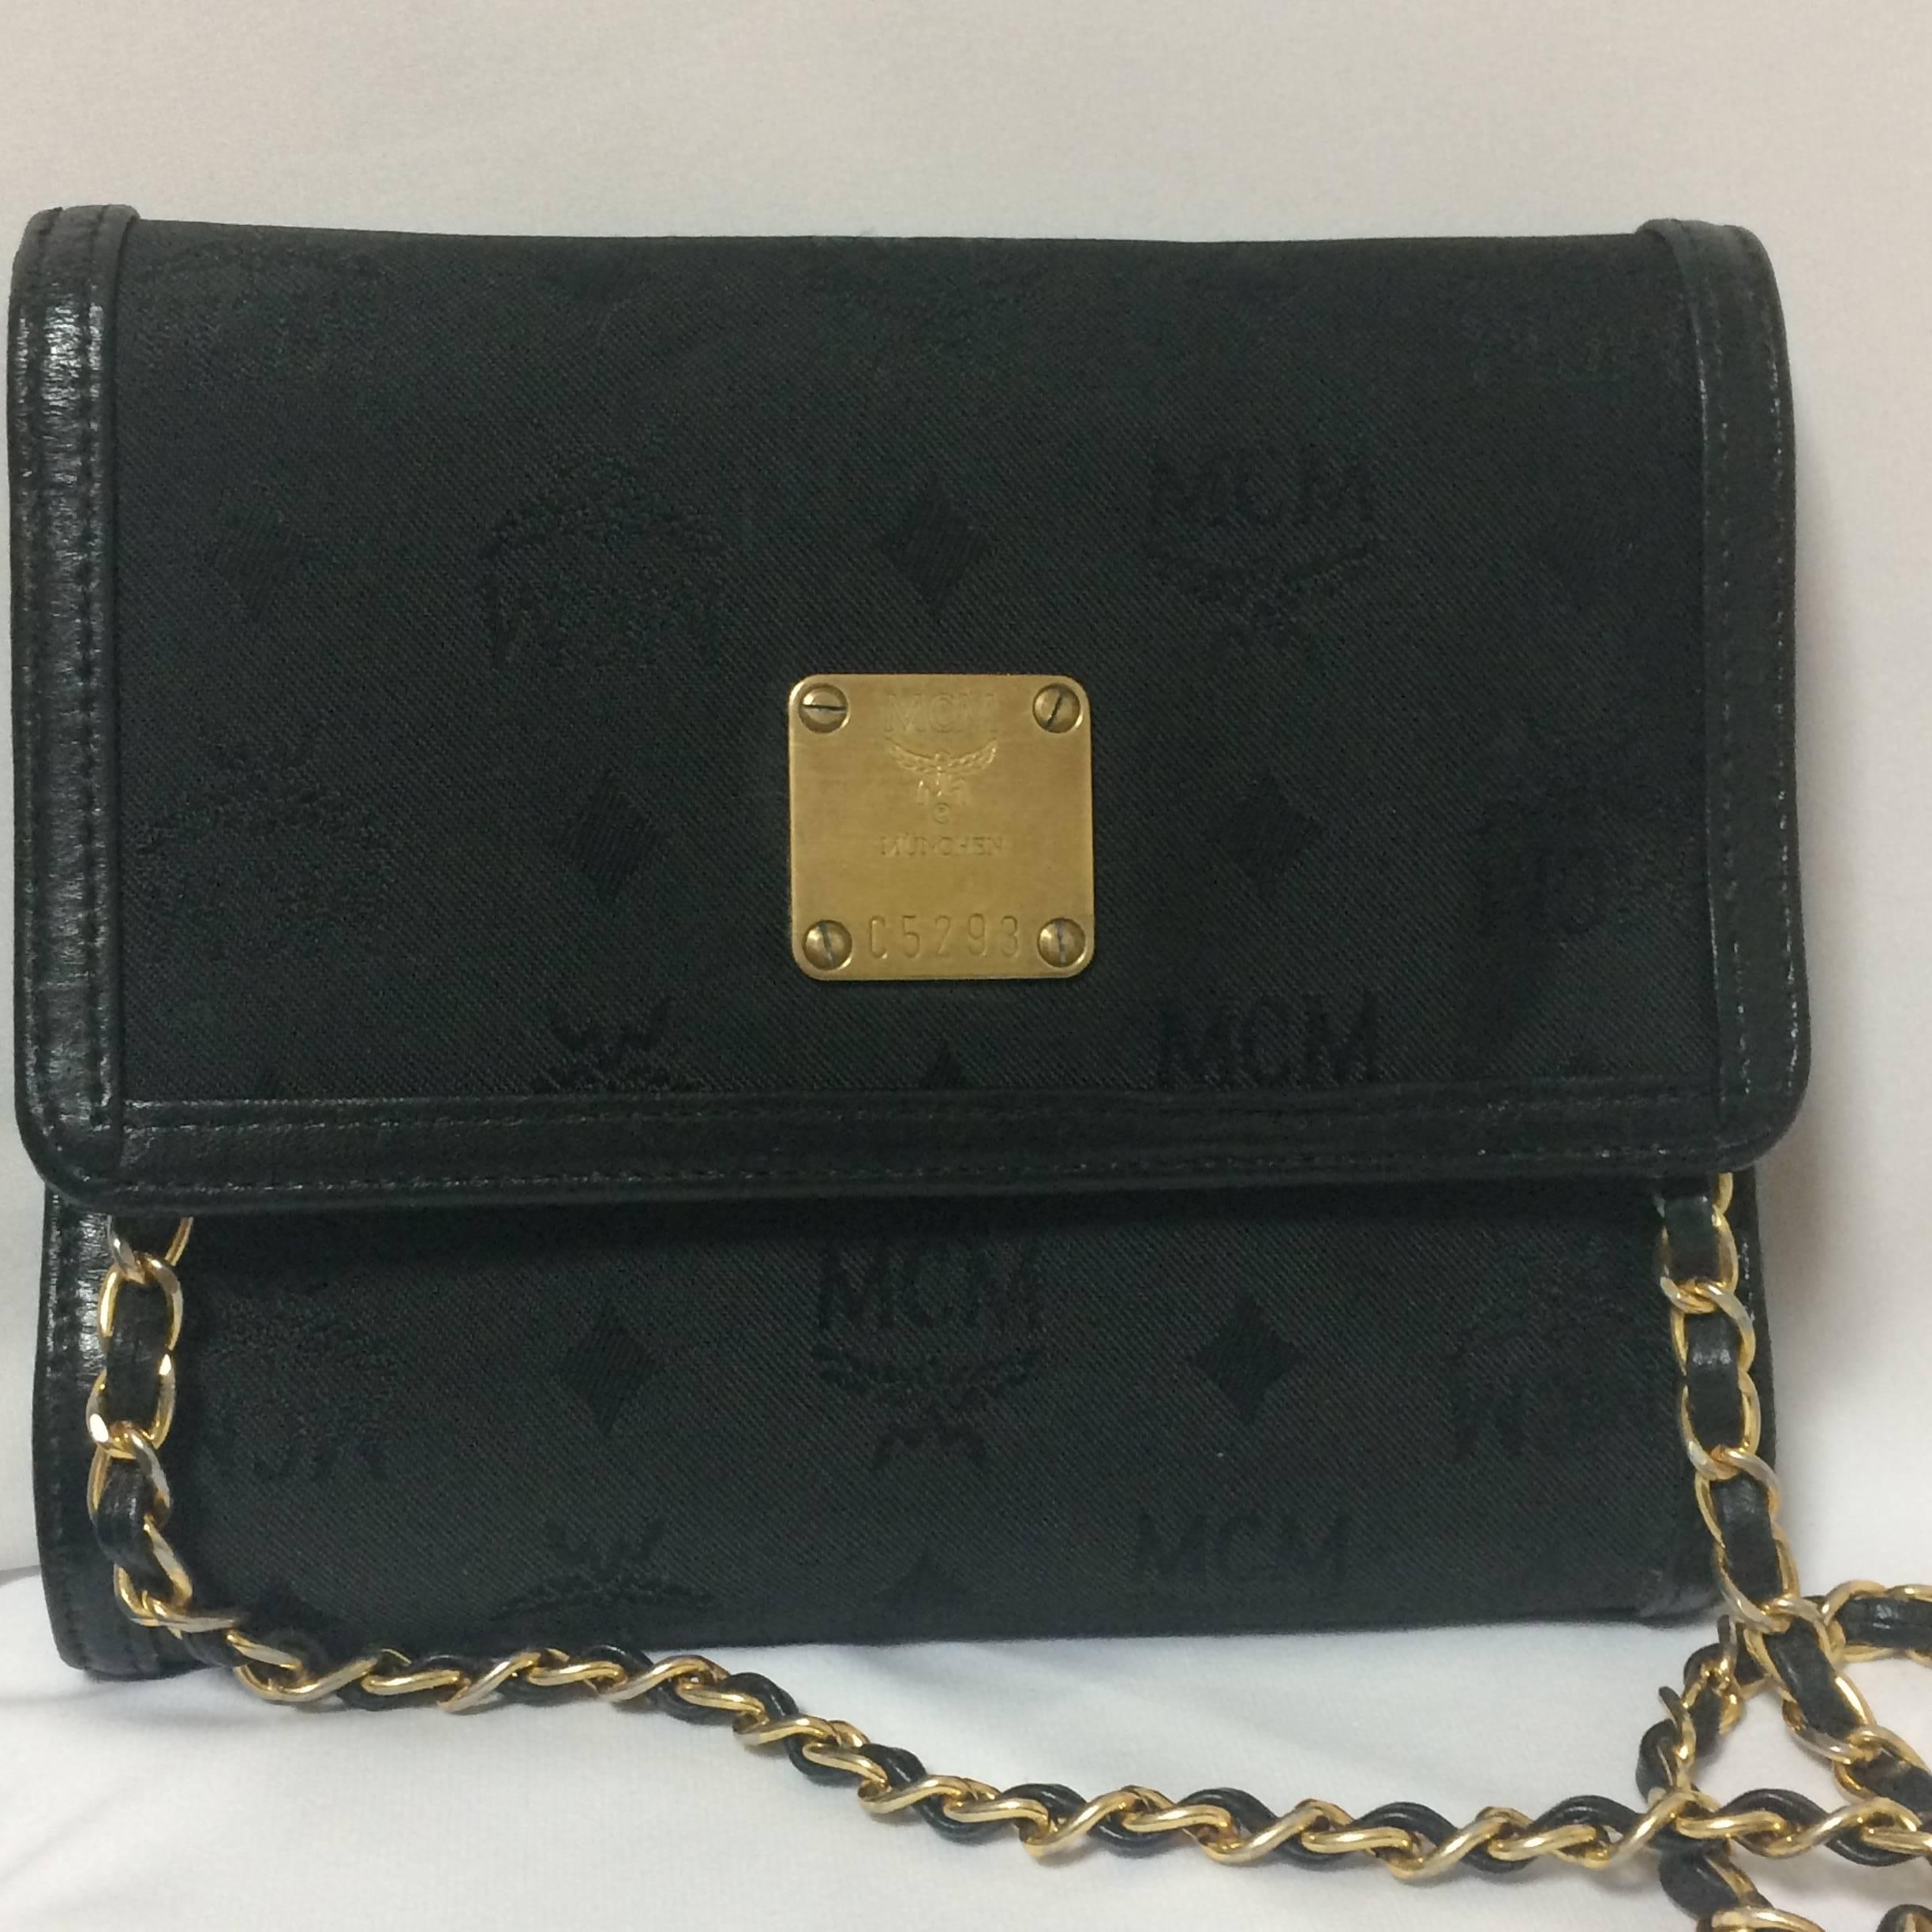 1990s. Vintage MCM black nylon monogram rare clutch shoulder bag with leather trimmings golden chain strap. Phenomenon, Big Bang.

MCM has been back in the fashion trend again!!
Now it's considered to be one of the must-have designer in